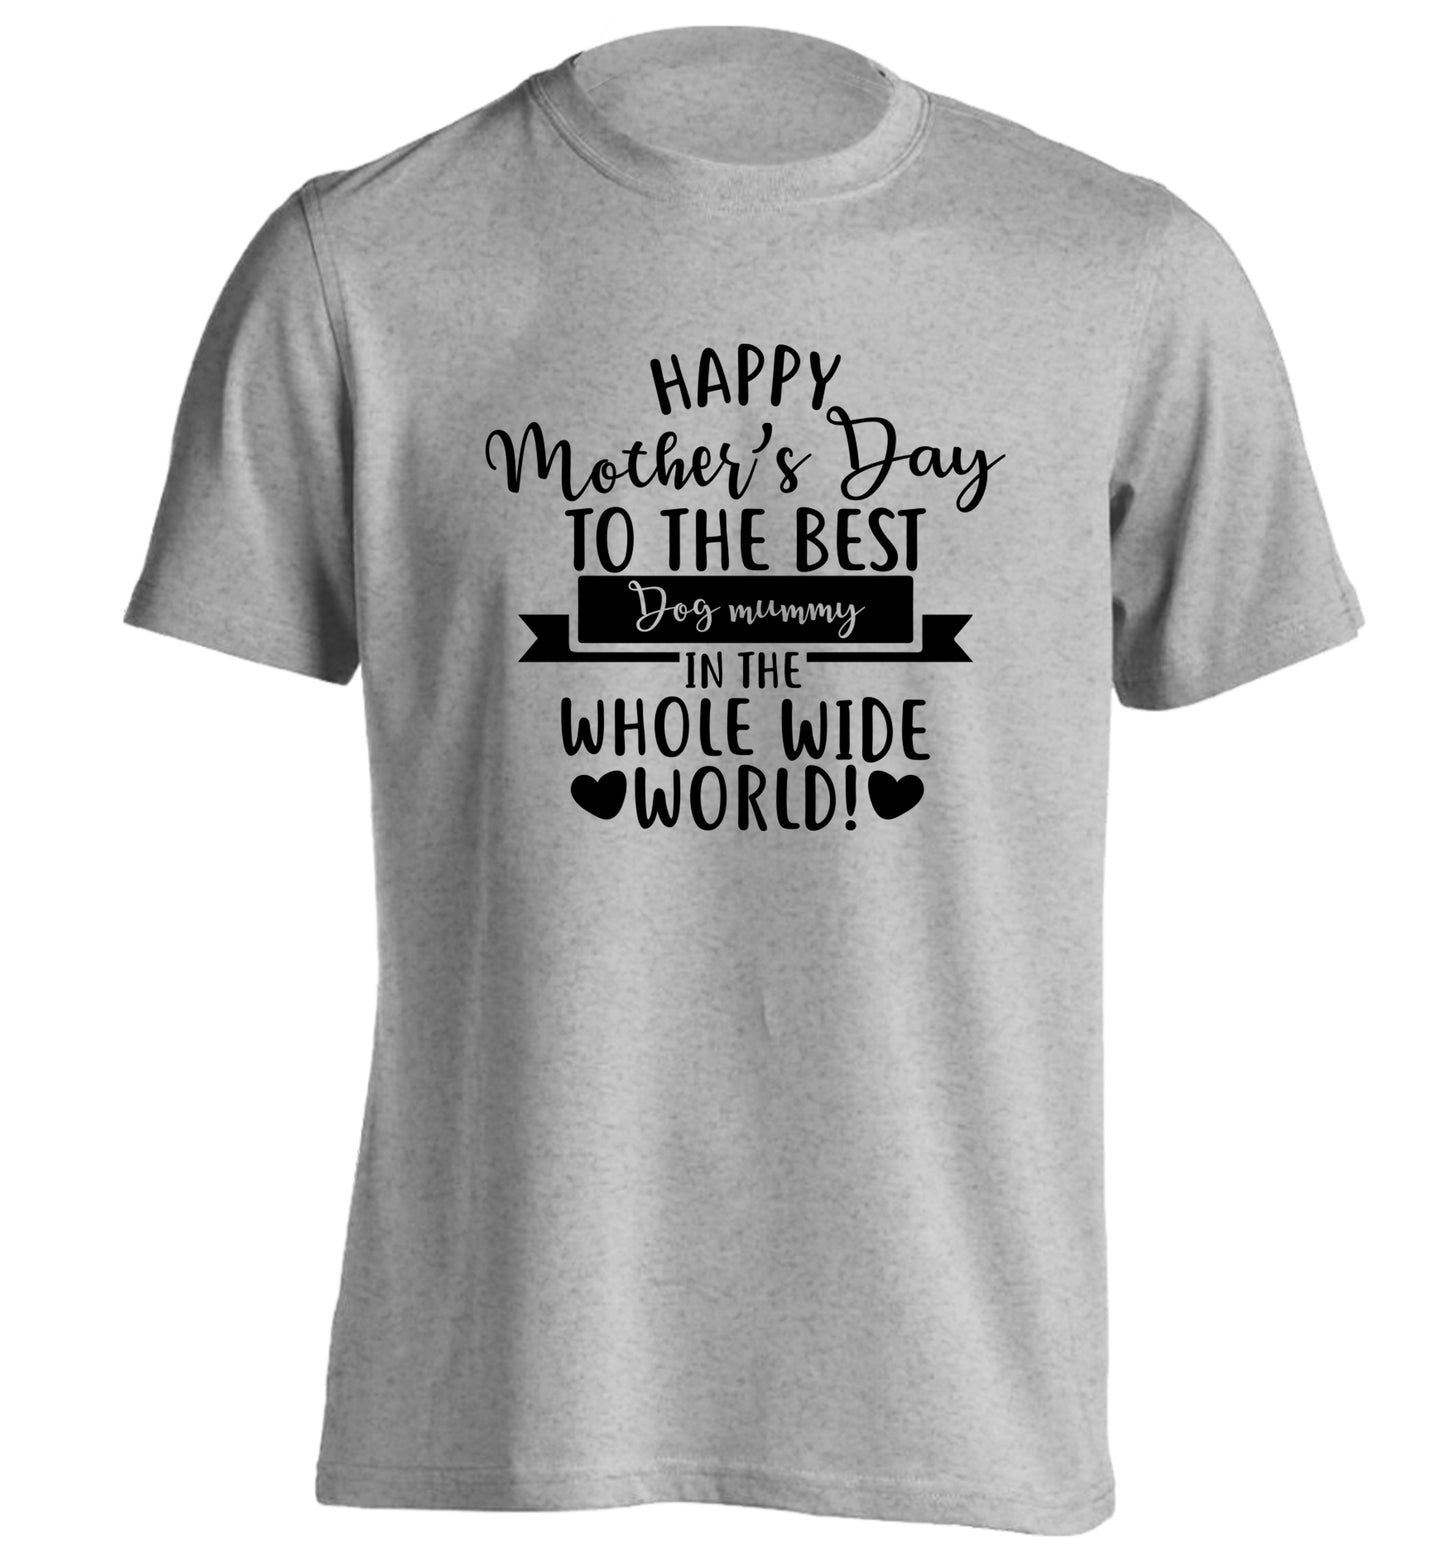 Happy mother's day to the best dog mummy in the world adults unisex grey Tshirt 2XL